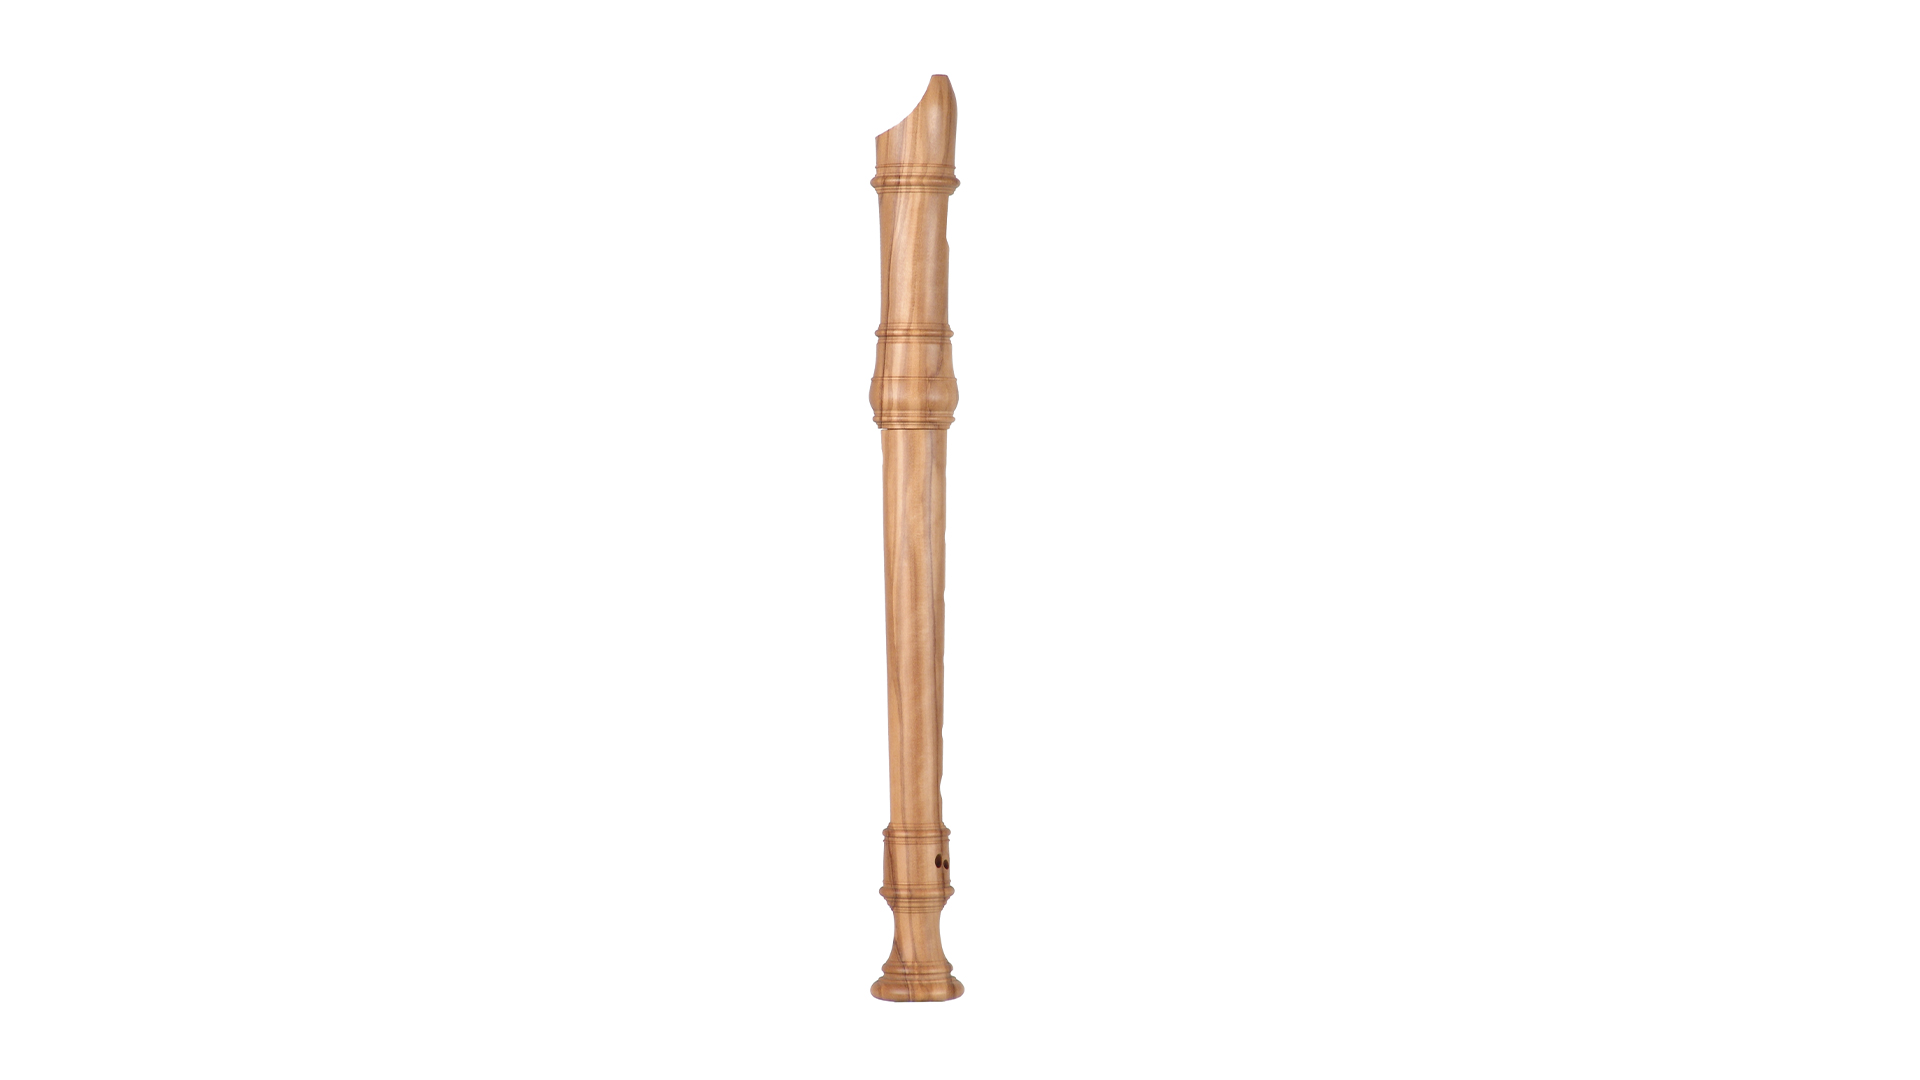 Küng, "SUPERIO", soprano in c'', baroque double hole, olive wood